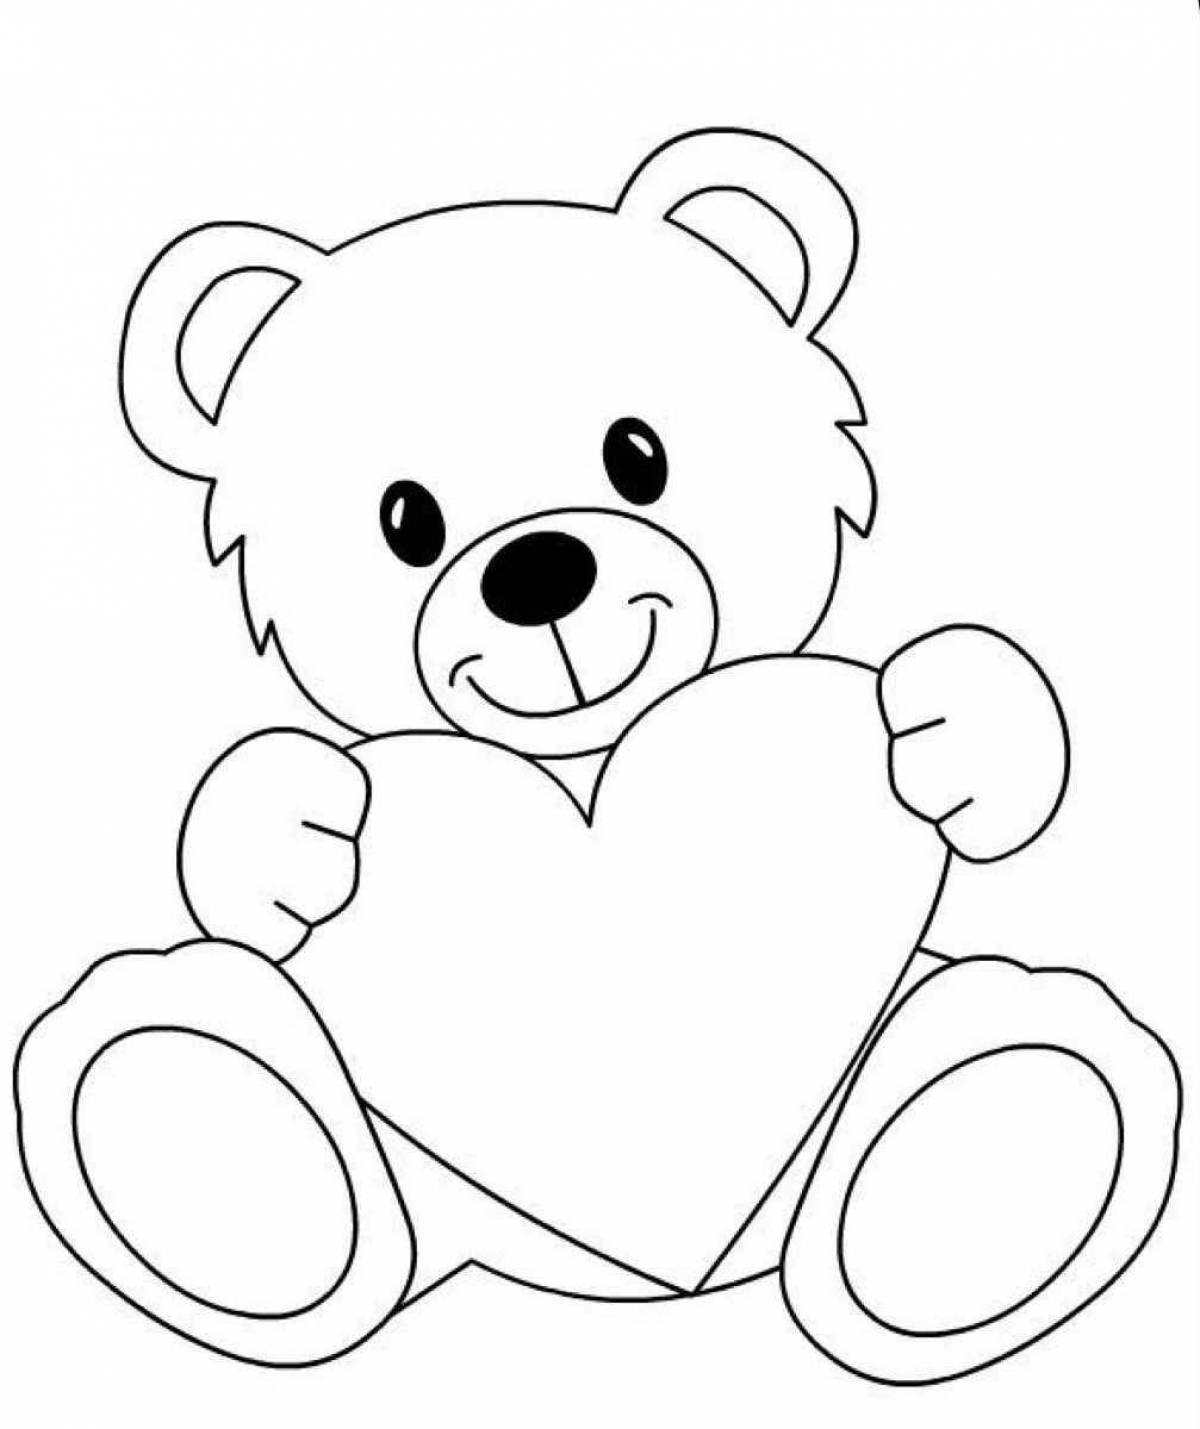 Living teddy bear coloring book for kids